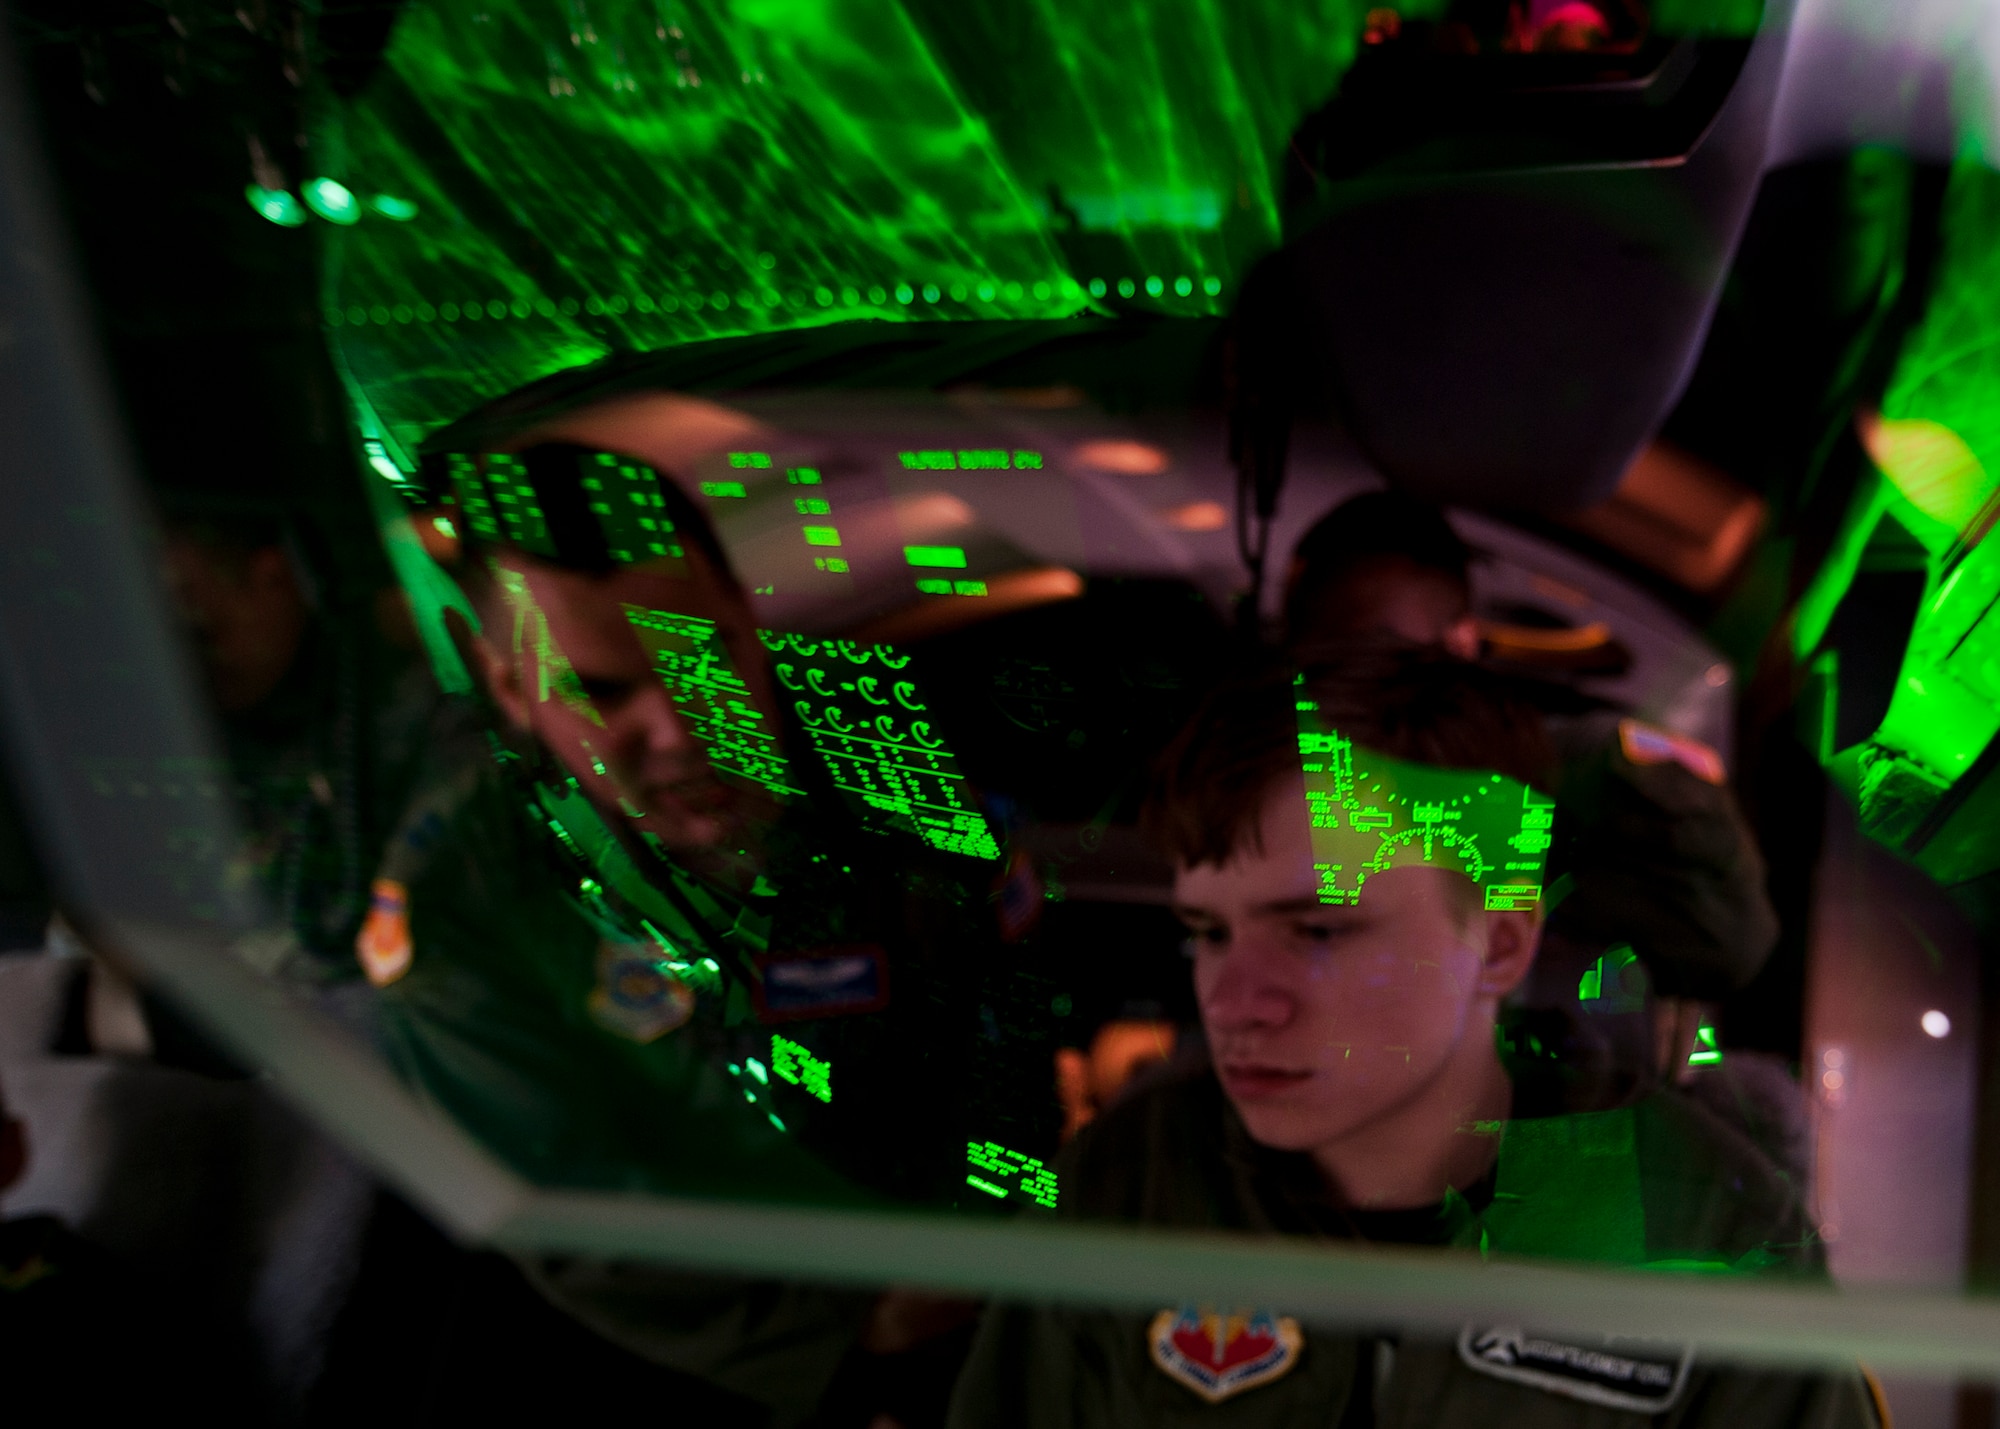 Keegan Vowell, 16-year-old Abilene resident, views the cockpit of a C-130J during a “Pilot for a Day” tour Jan. 14, 2013, at Dyess Air Force Base, Texas. As part of the program, Keegan received his own flight suit, was demonstrated the capabilities of the 7th Security Forces K-9 Unit, toured the air traffic control tower, taxied a bomber, had his name put onto an aircraft, created his own Hollywood explosion with the 7th Civil Engineer Squadron Explosive Ordinance Disposal Unit and was presented a coin from the base commander. (U.S. Air Force photo by Airman 1st Class Damon Kasberg/ Released)